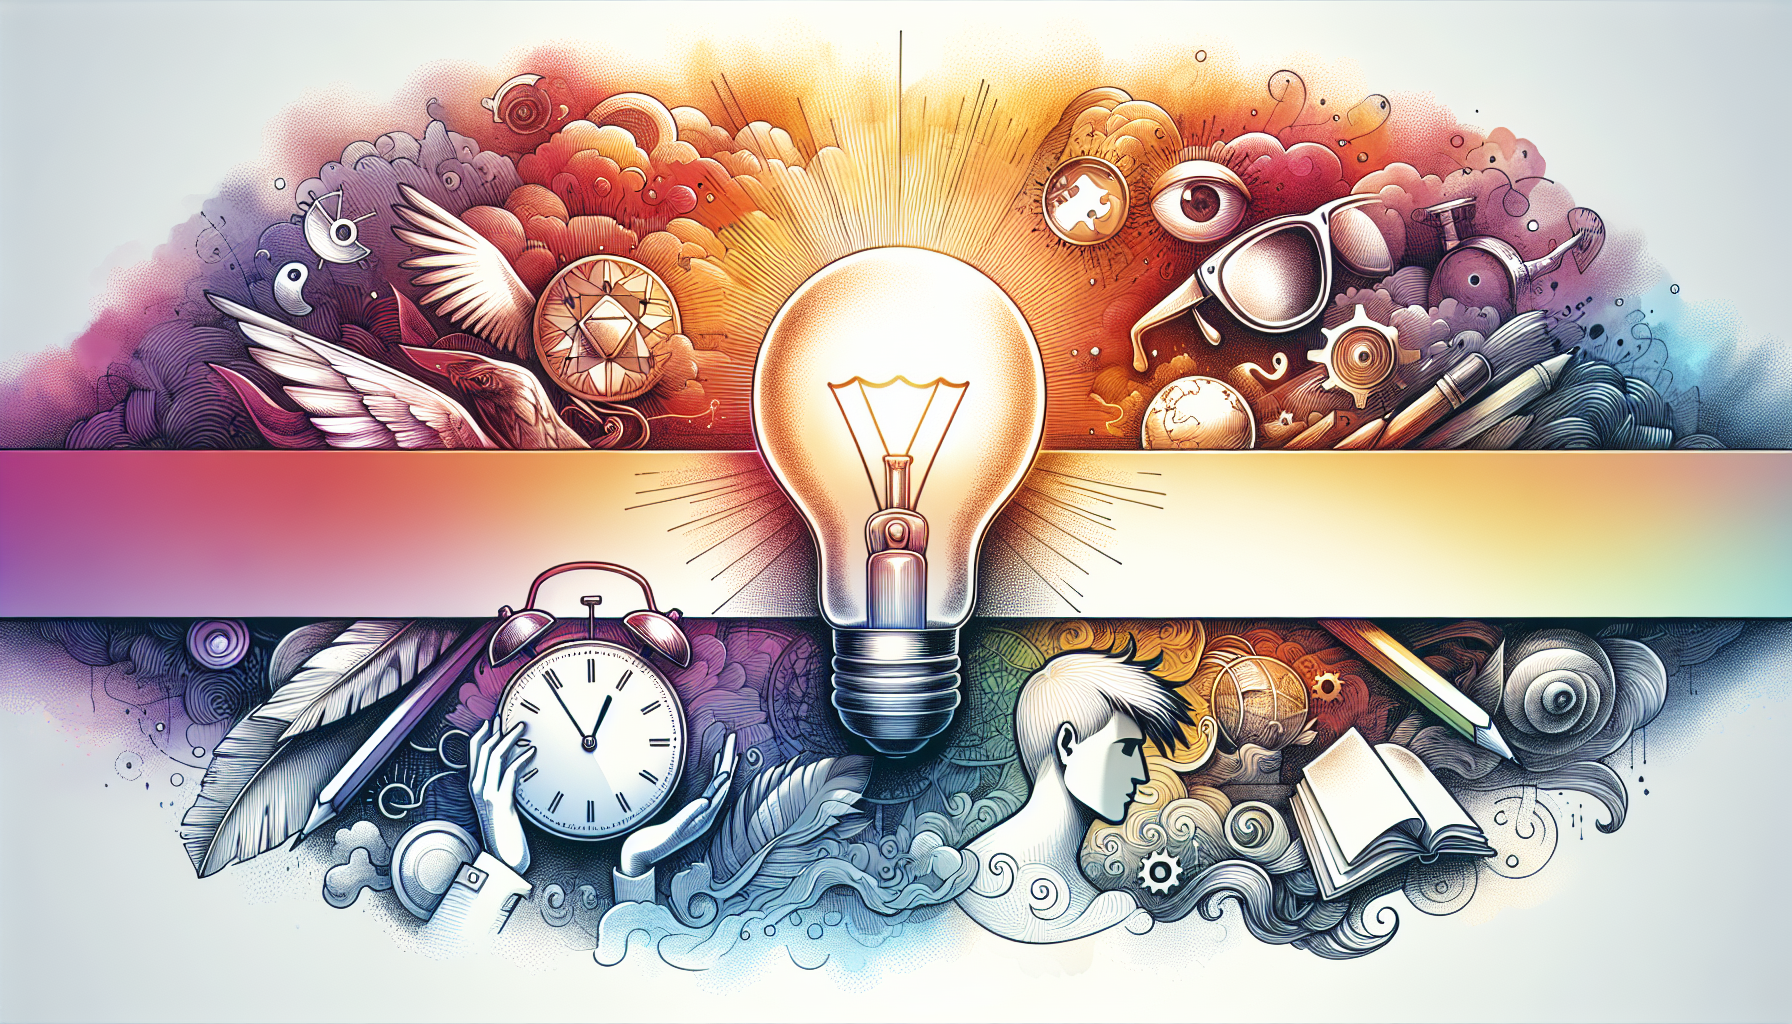 A lightbulb symbolizing a new idea, surrounded by doodles representing various concepts discussed in